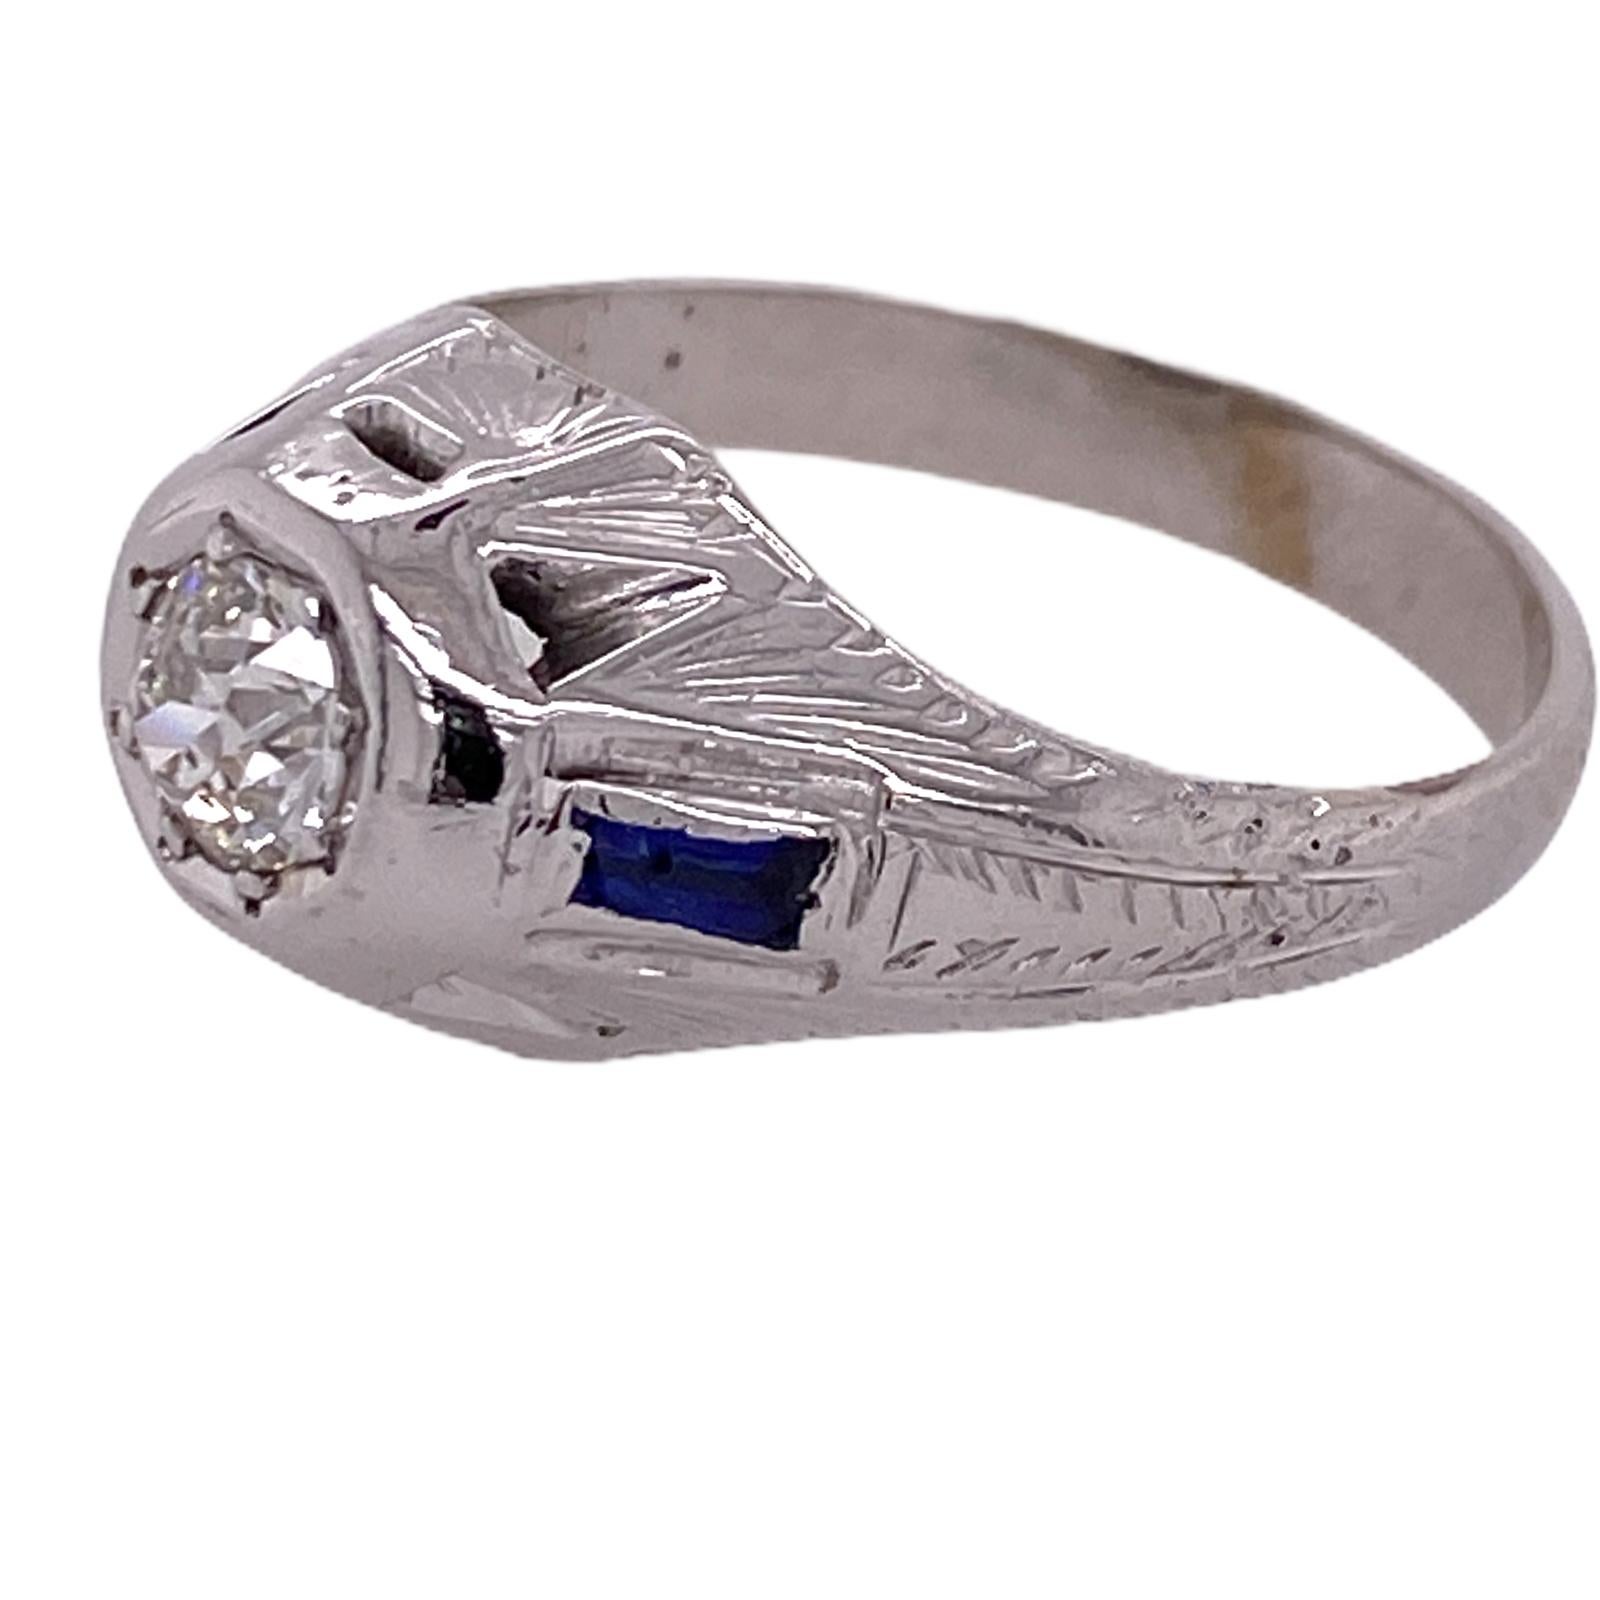 Beautiful Art Deco diamond ring fashioned in 18 karat white gold. The Old European Cut Diamond weighs approximately .50 carat and is graded I color and SI2 clarity. The mounting features sapphire accents and measures 11mm in width. The ring is